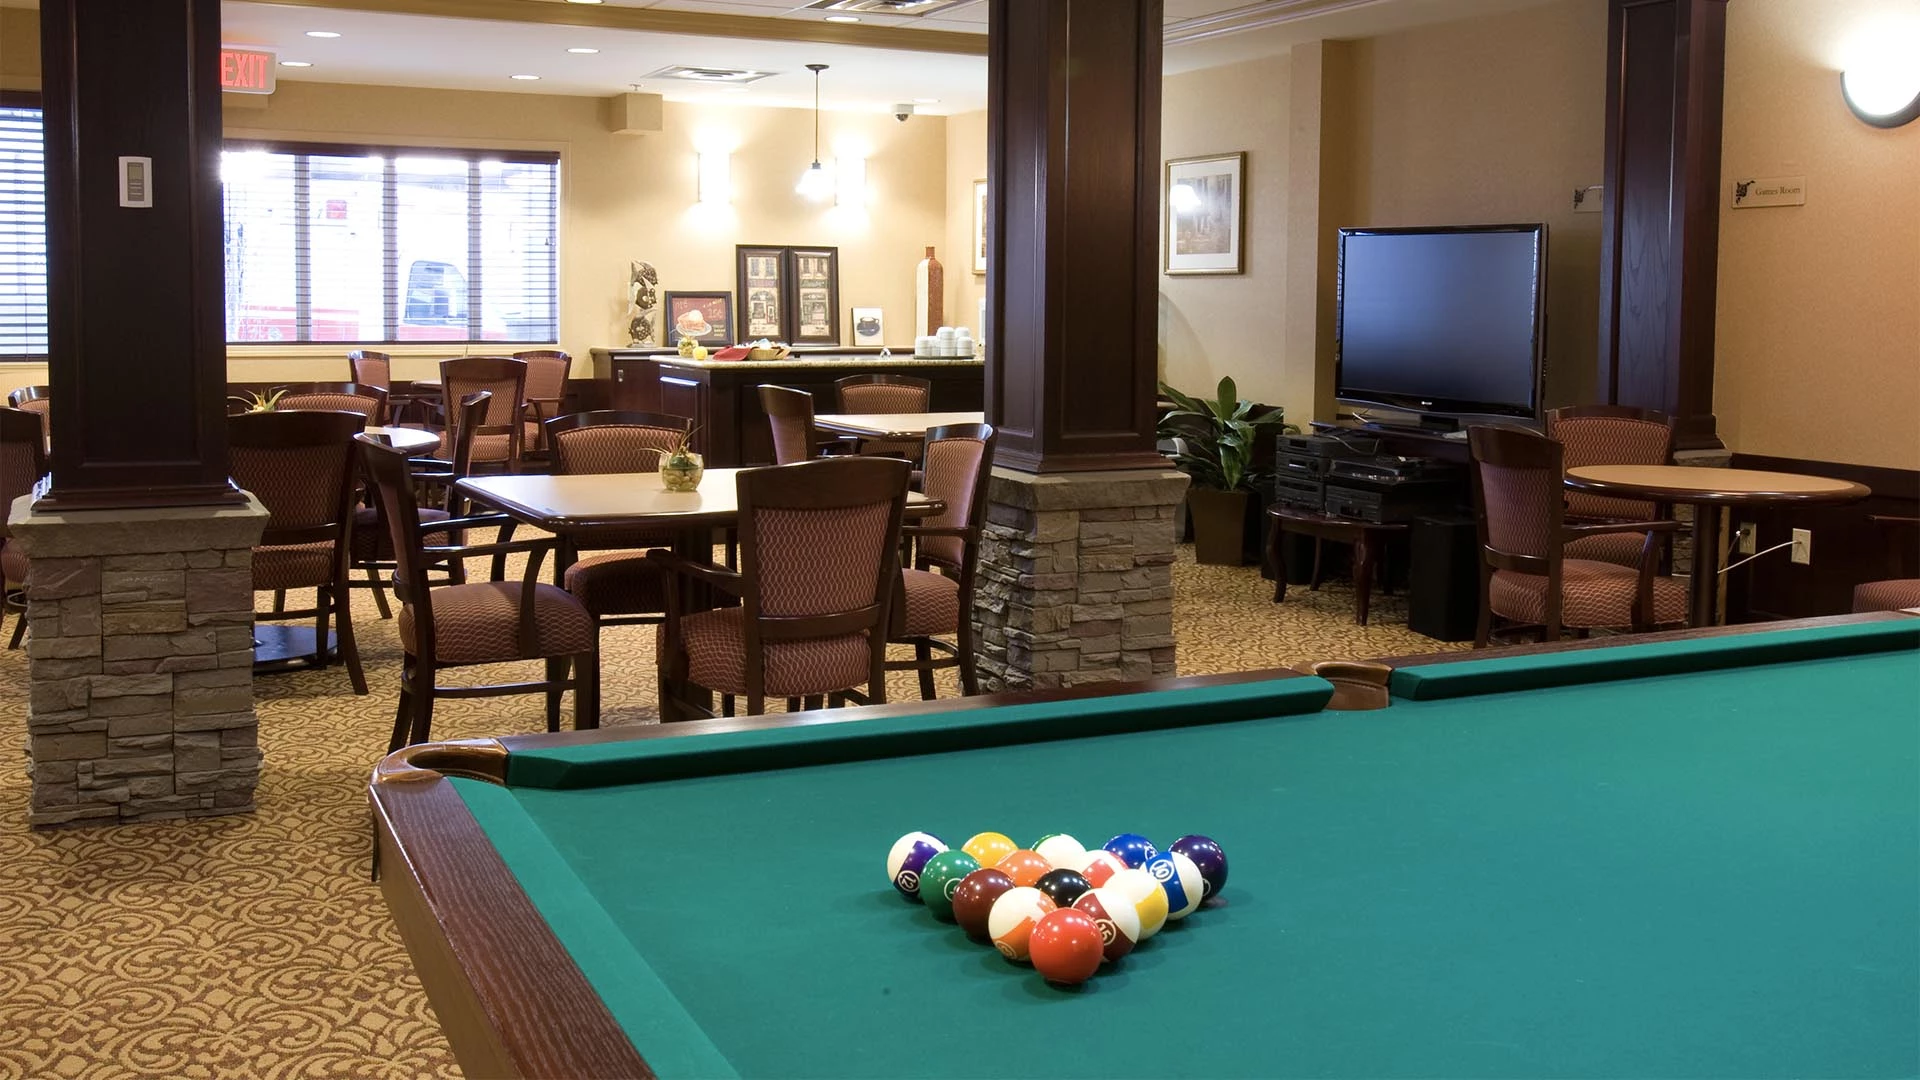 Game room with pool table and a TV in Summerwood Village senior living